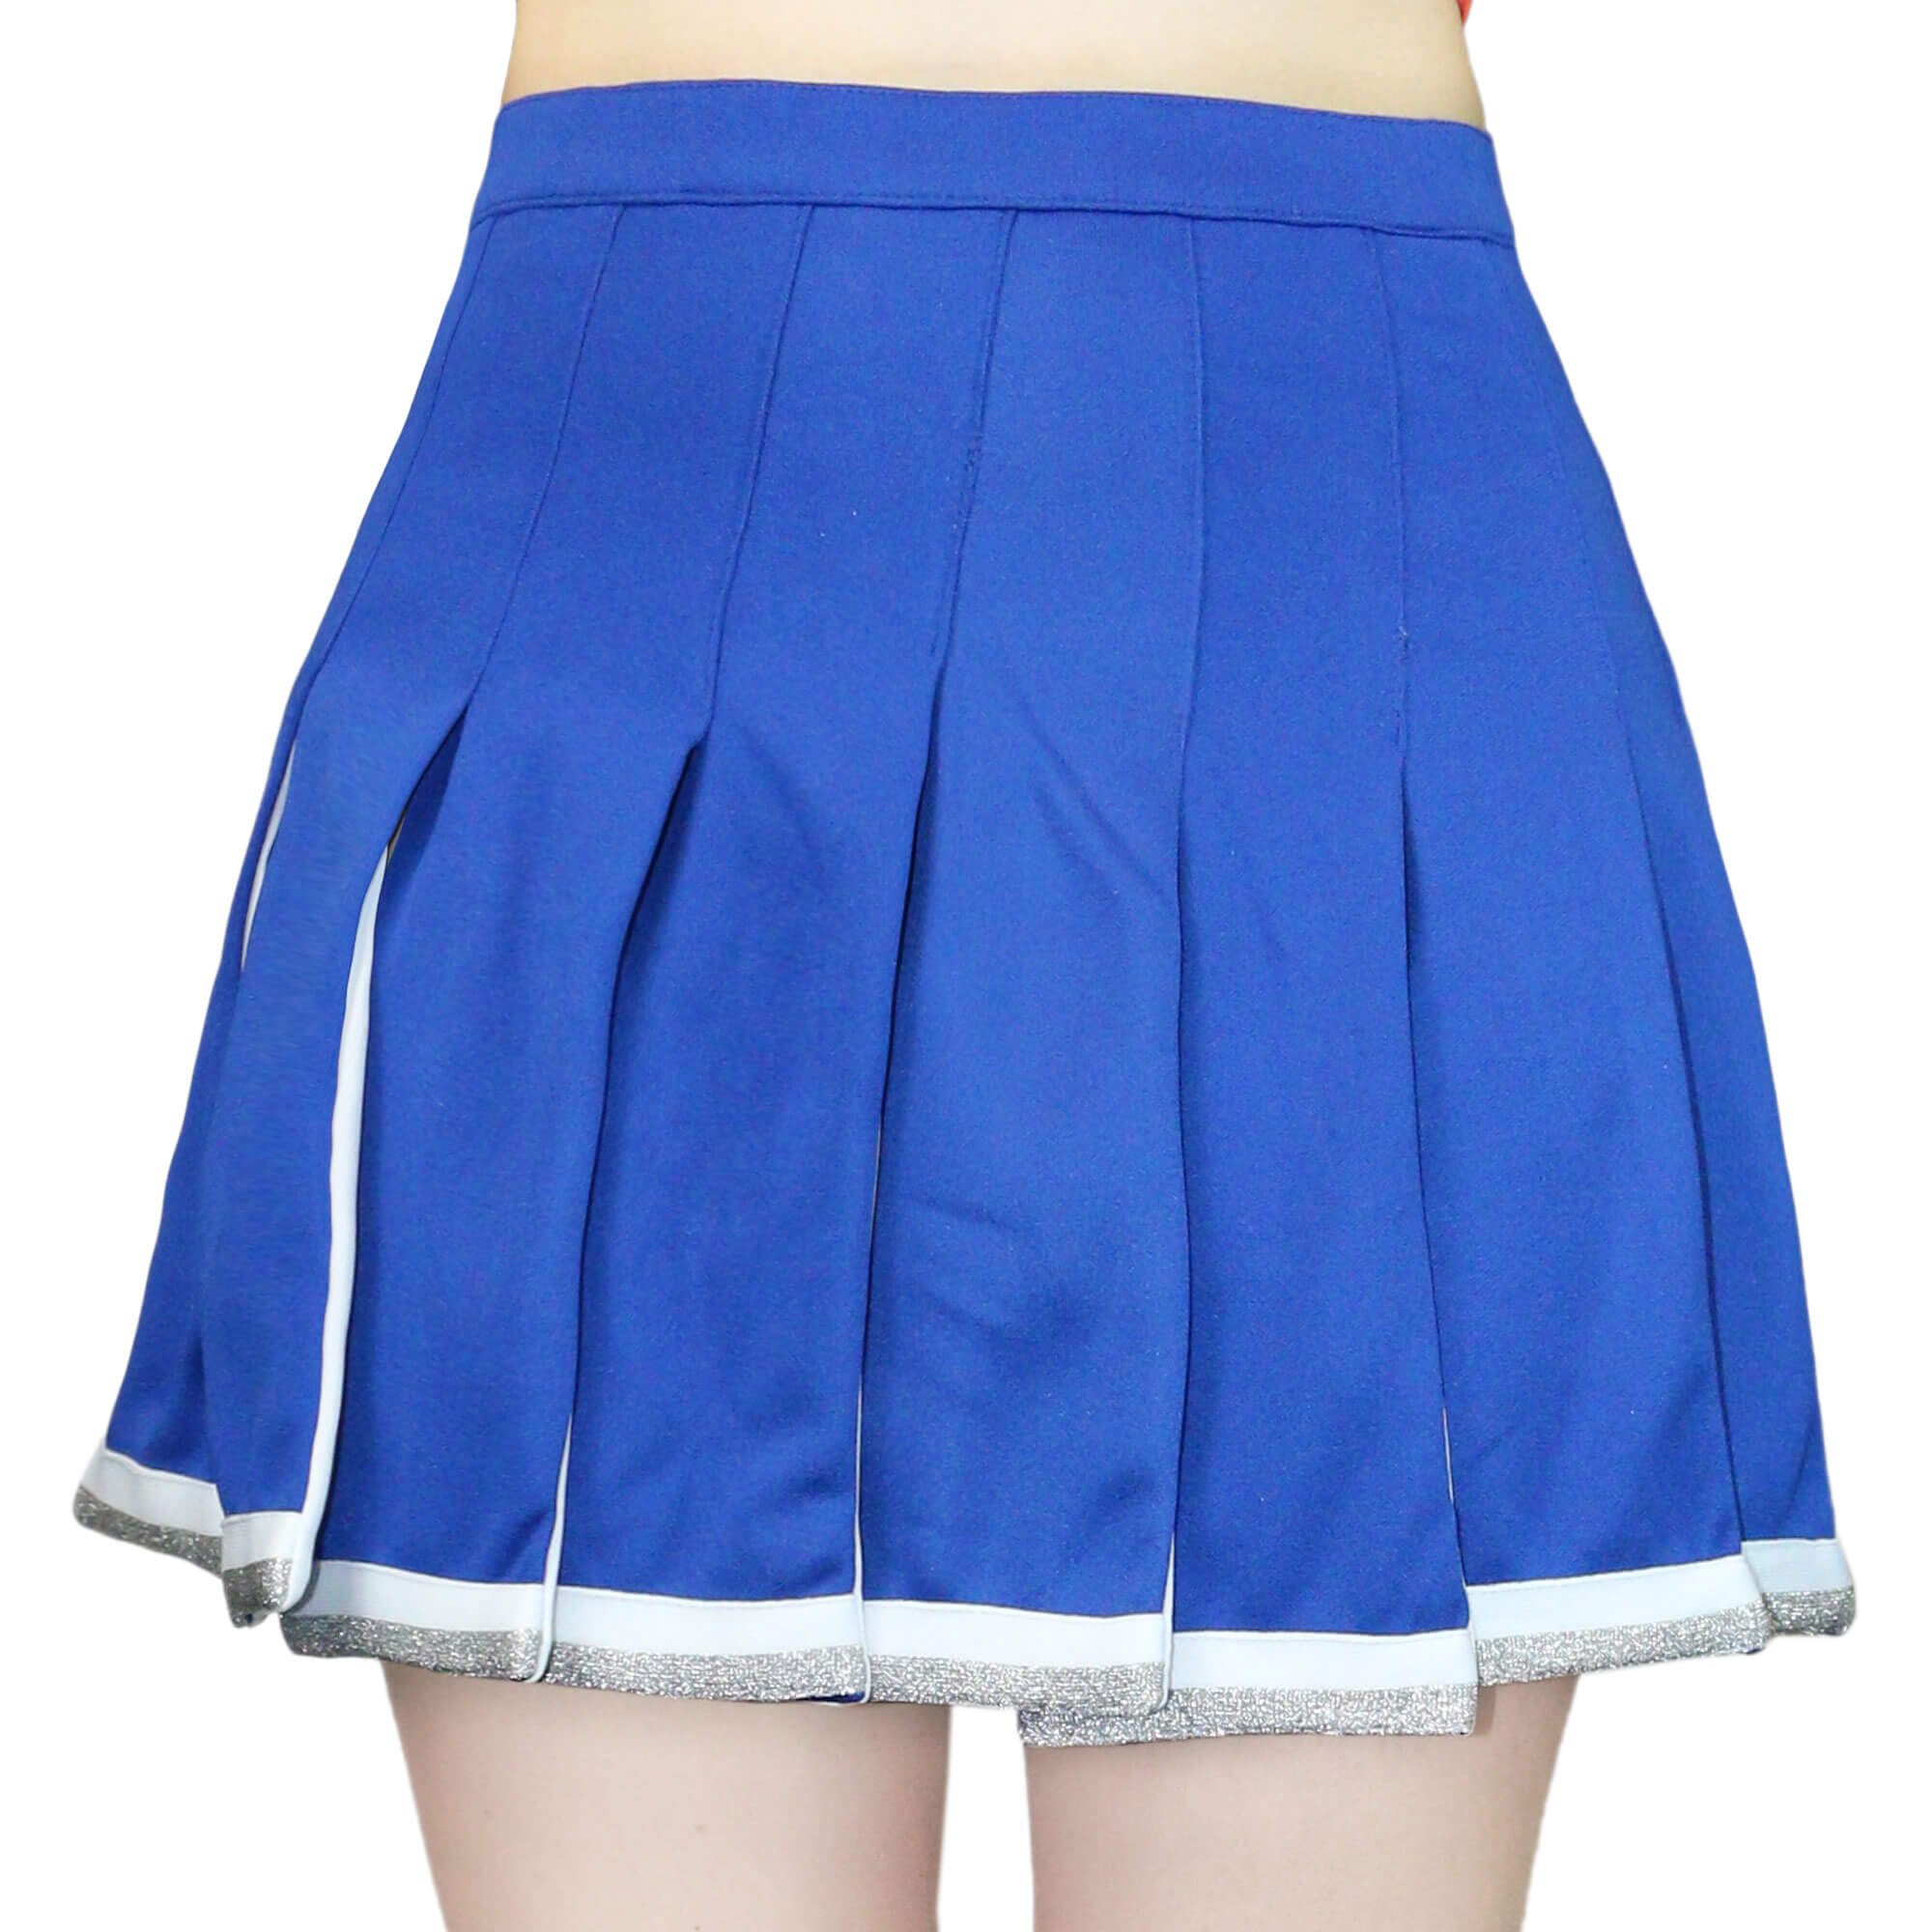 Danzcue Child Cheerleading Pleated Skirt - Click Image to Close